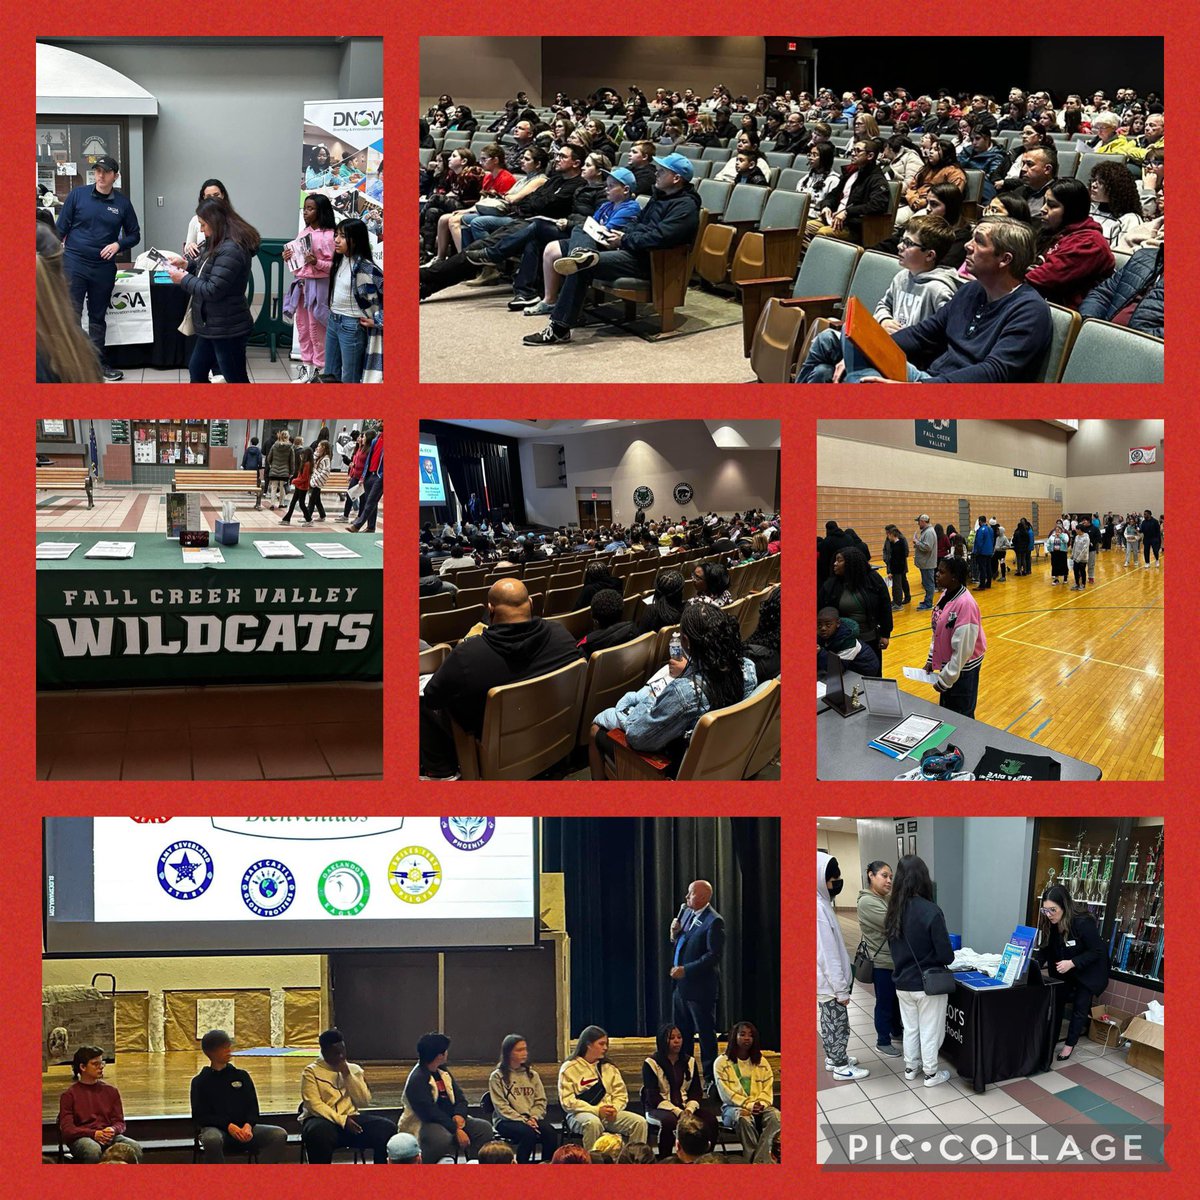 What a great turnout at our Spring Open House. Excited to welcome these future Wildcats next school year! Go Wildcats and Be Excellent!